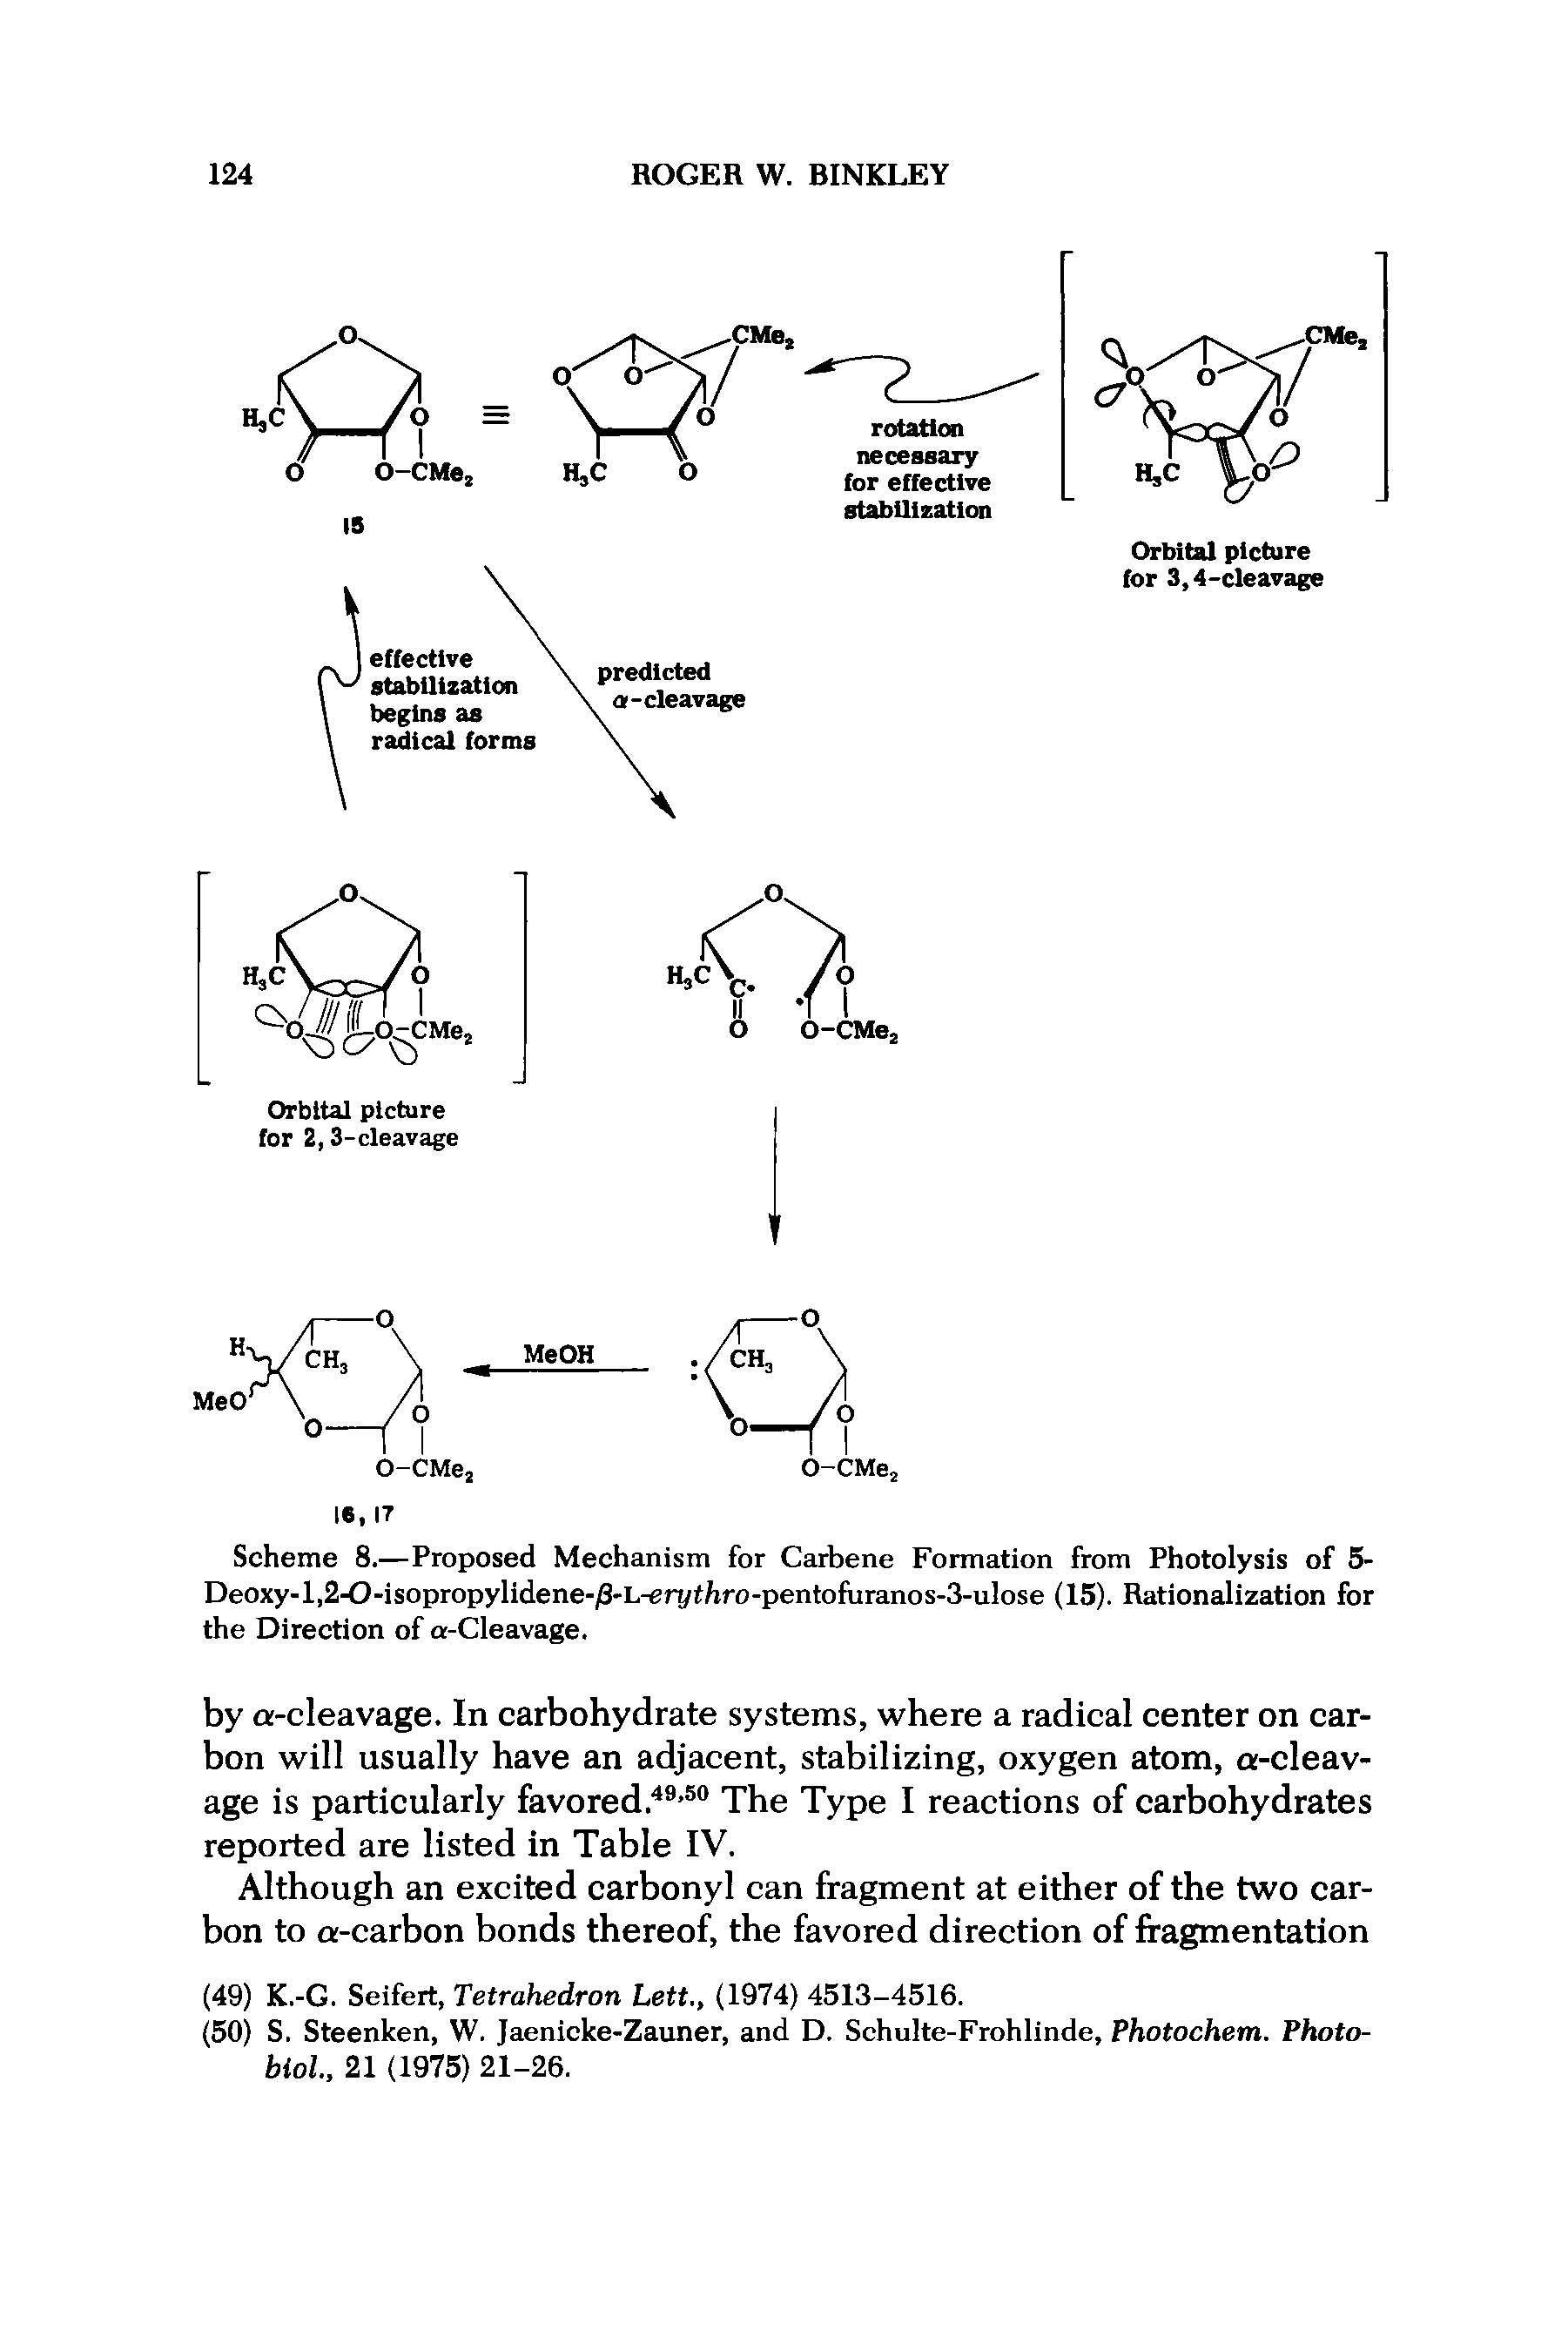 Scheme 8.—Proposed Mechanism for Carbene Formation from Photolysis of 5-Deoxy-l,2-0-isopropylidene-/3 L-erythro-pentofuranos-3-ulose (15). Rationalization for the Direction of a-Cleavage.